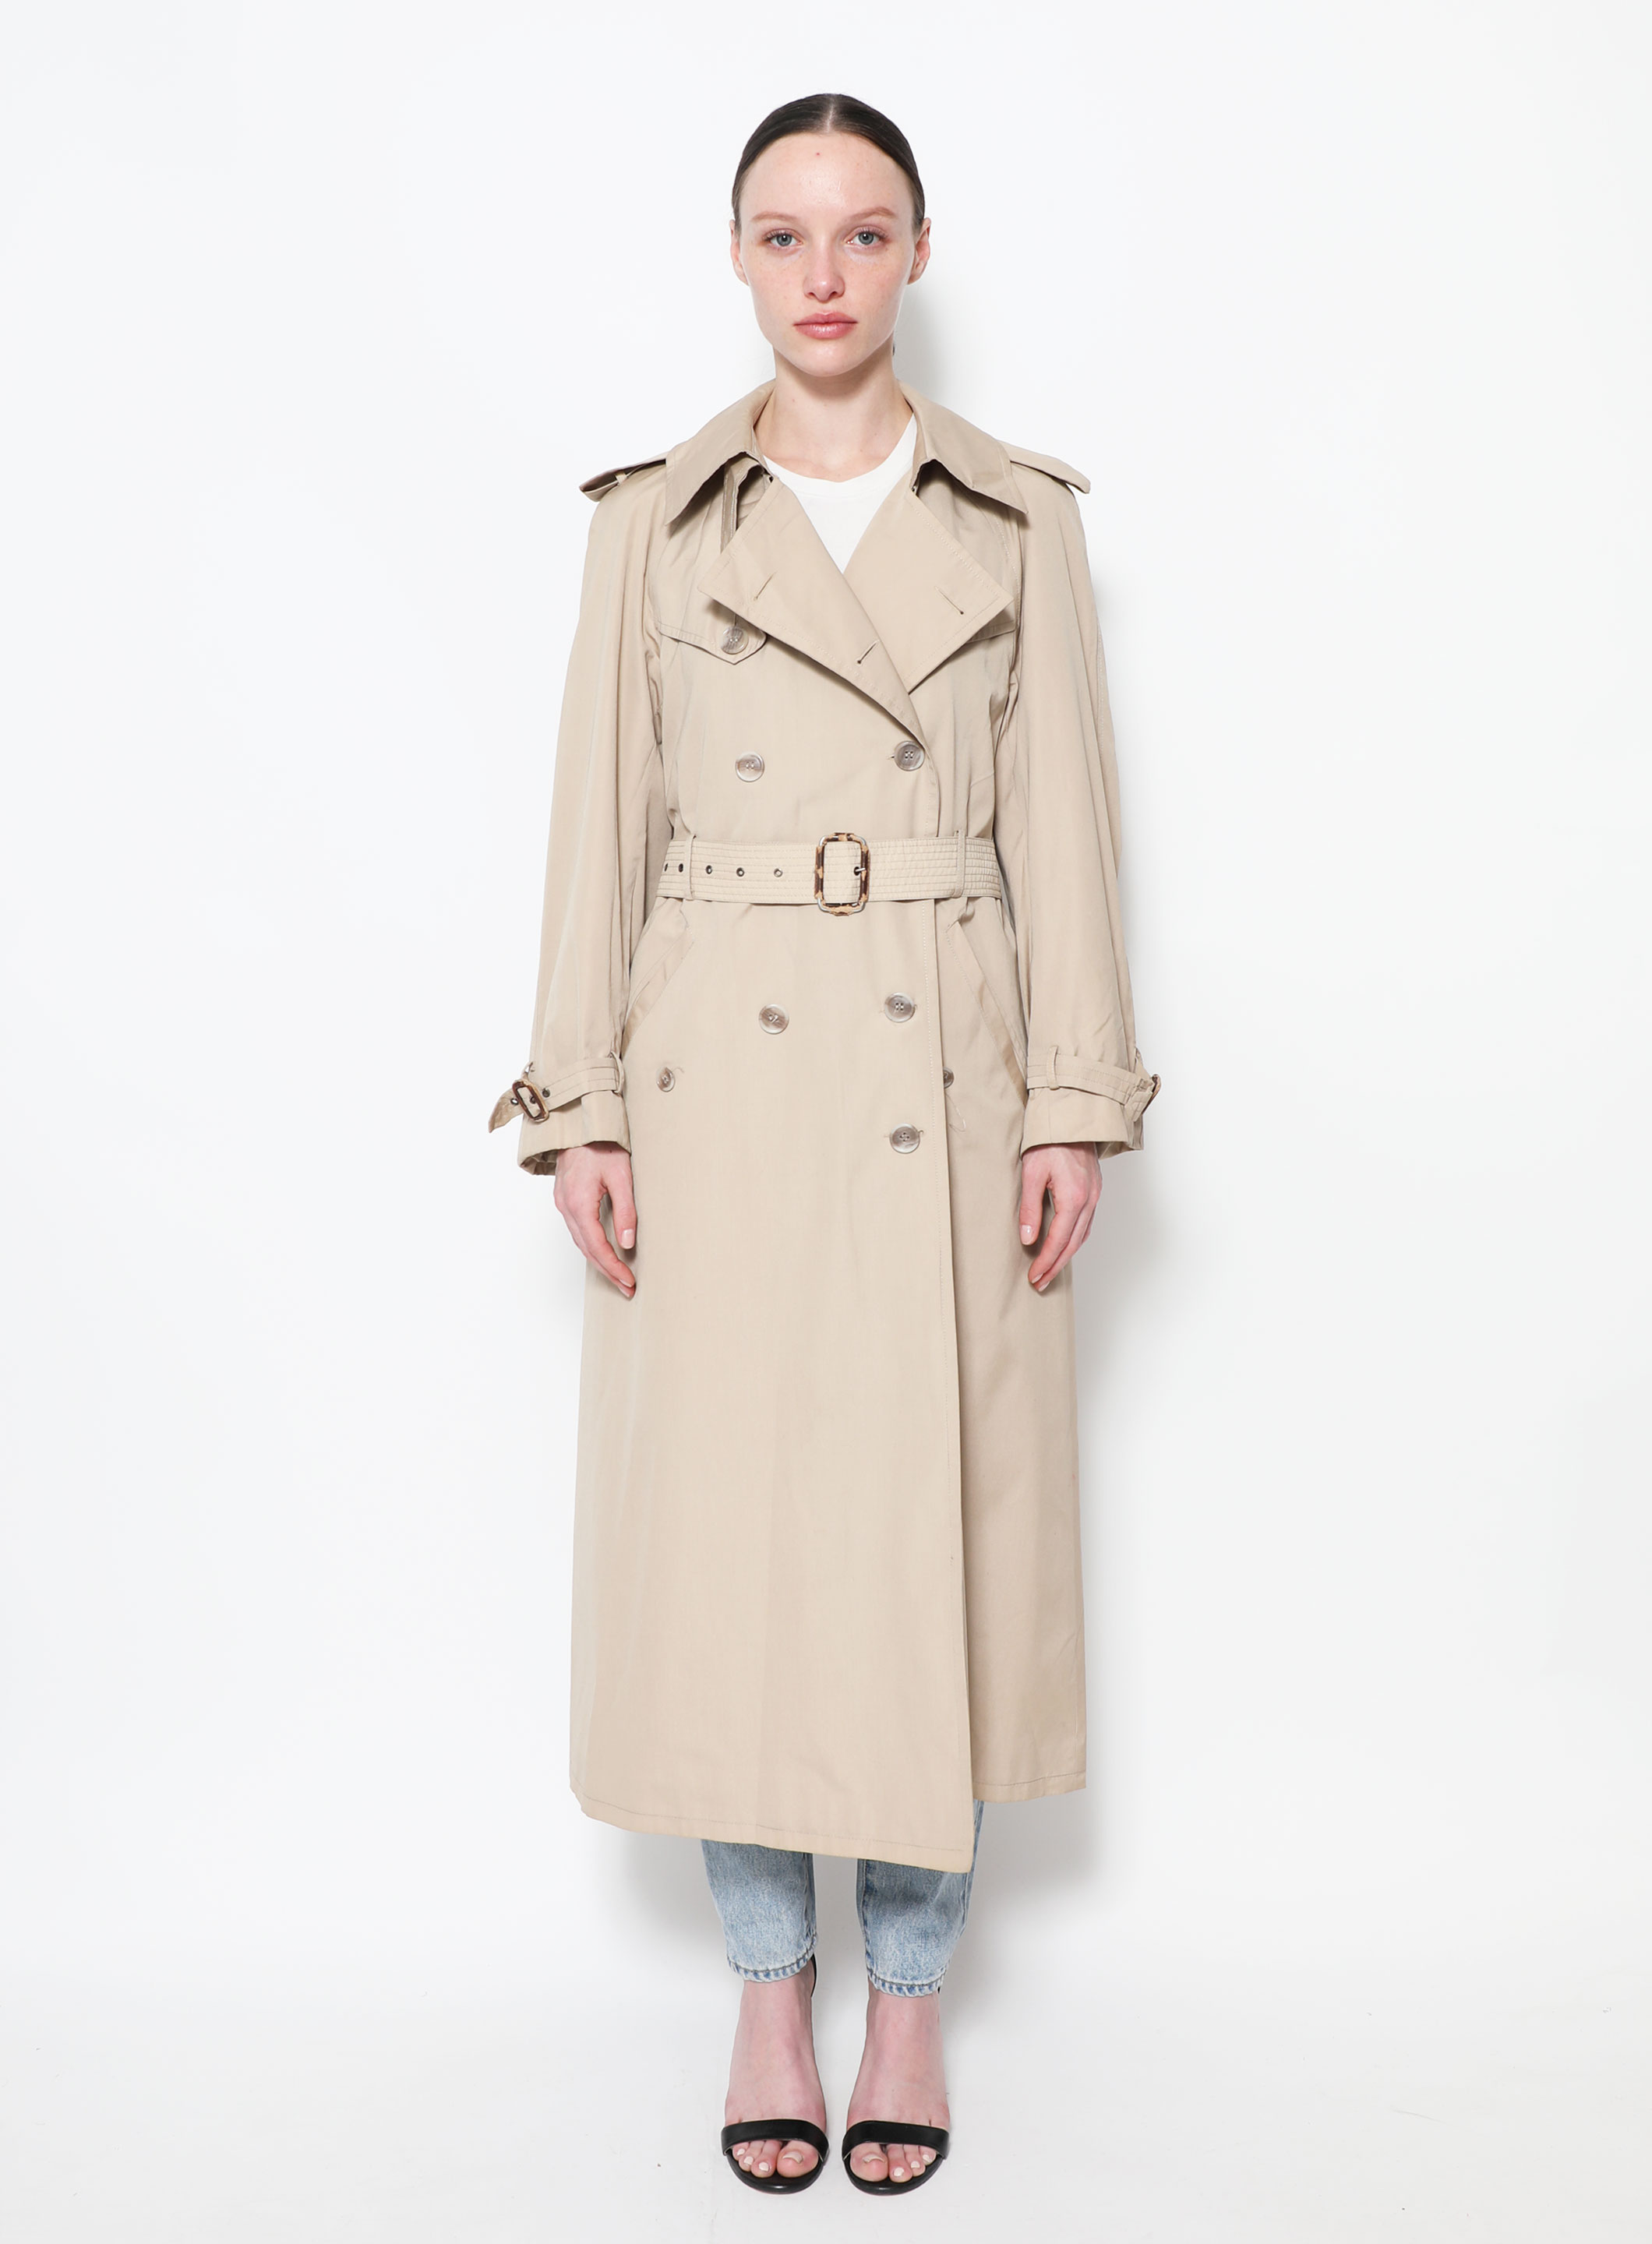 Help! I am struggling to identify if my vintage Burberry trench